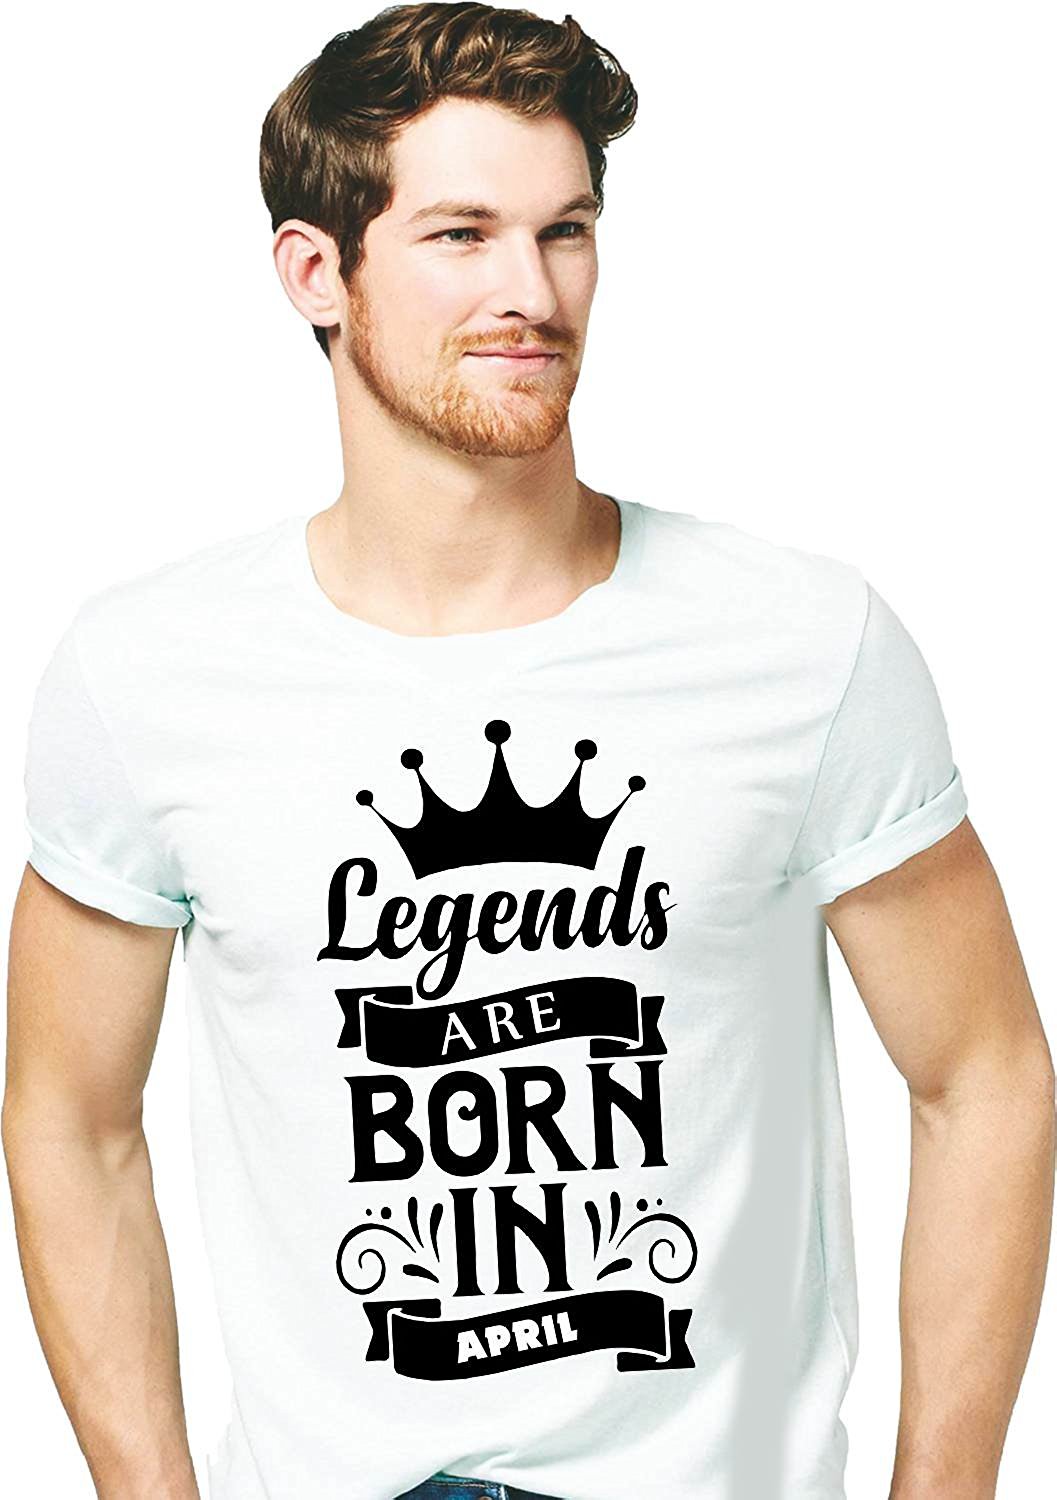 Double F Born In April T-shirts for men's